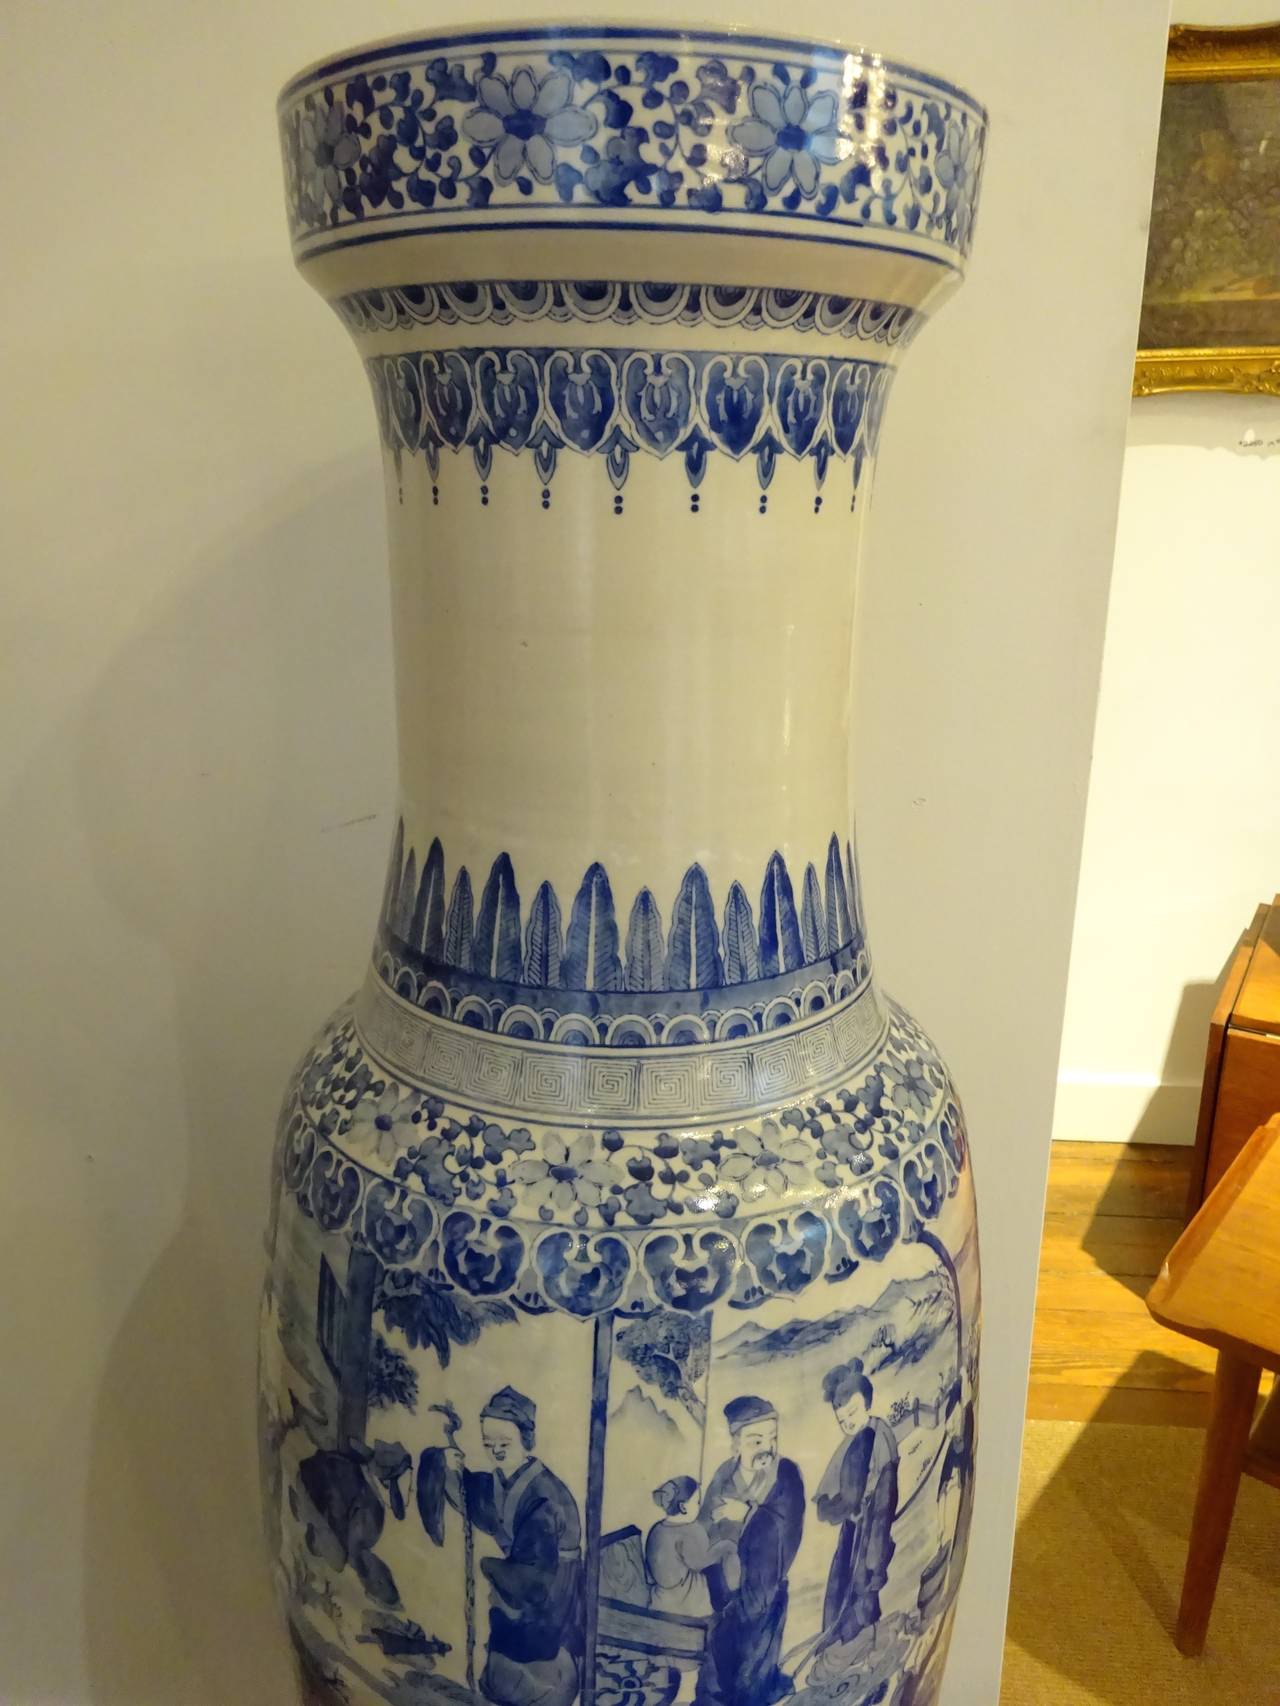 Palace Size Chinese Export Porcelain Vase, decorated in blue and white with Imperial Court Scenes